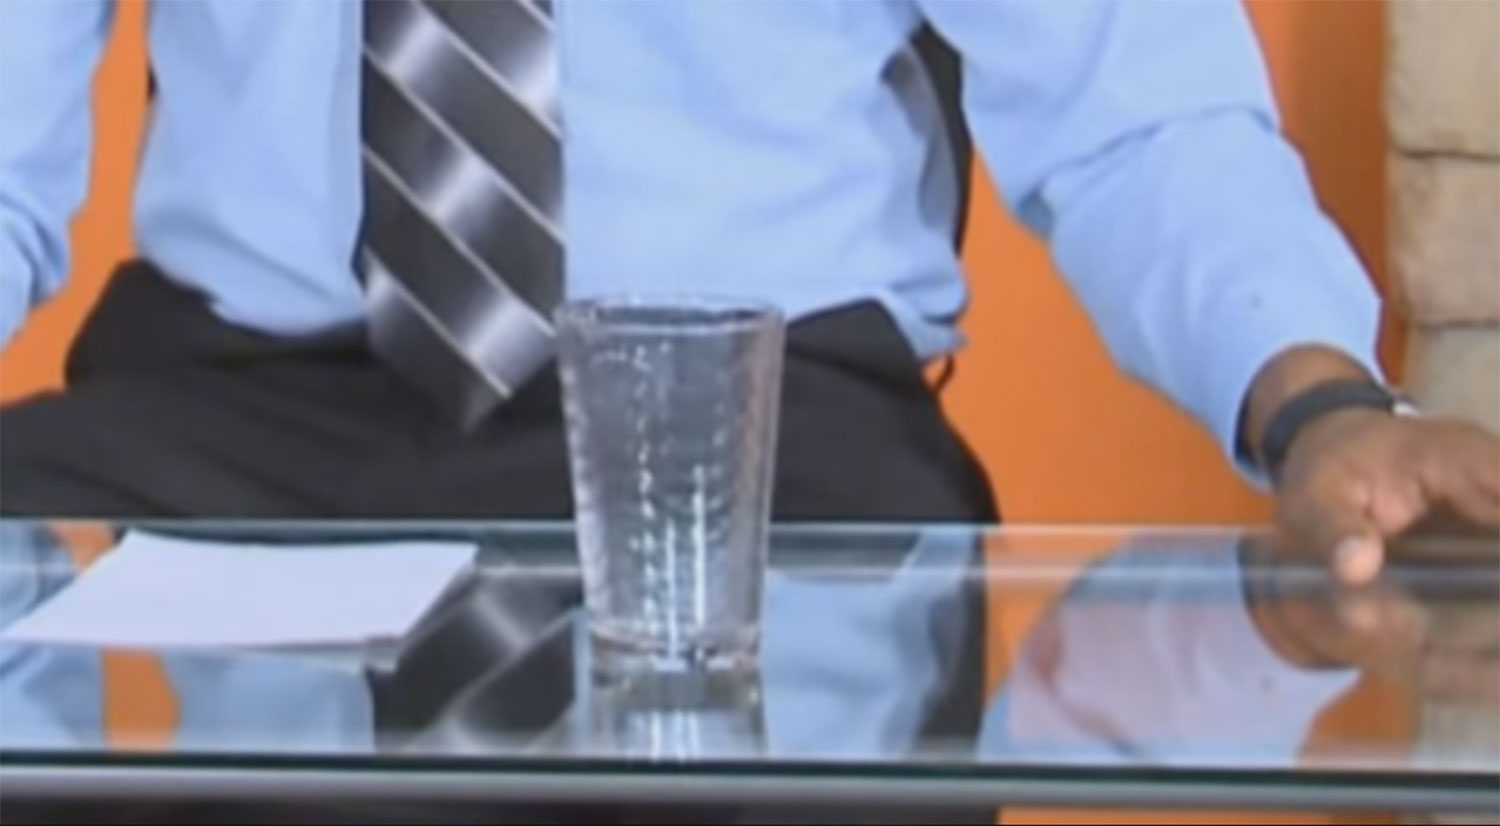 TV Presenter Spooked by 'Haunted' Moving Glass, Live on Air